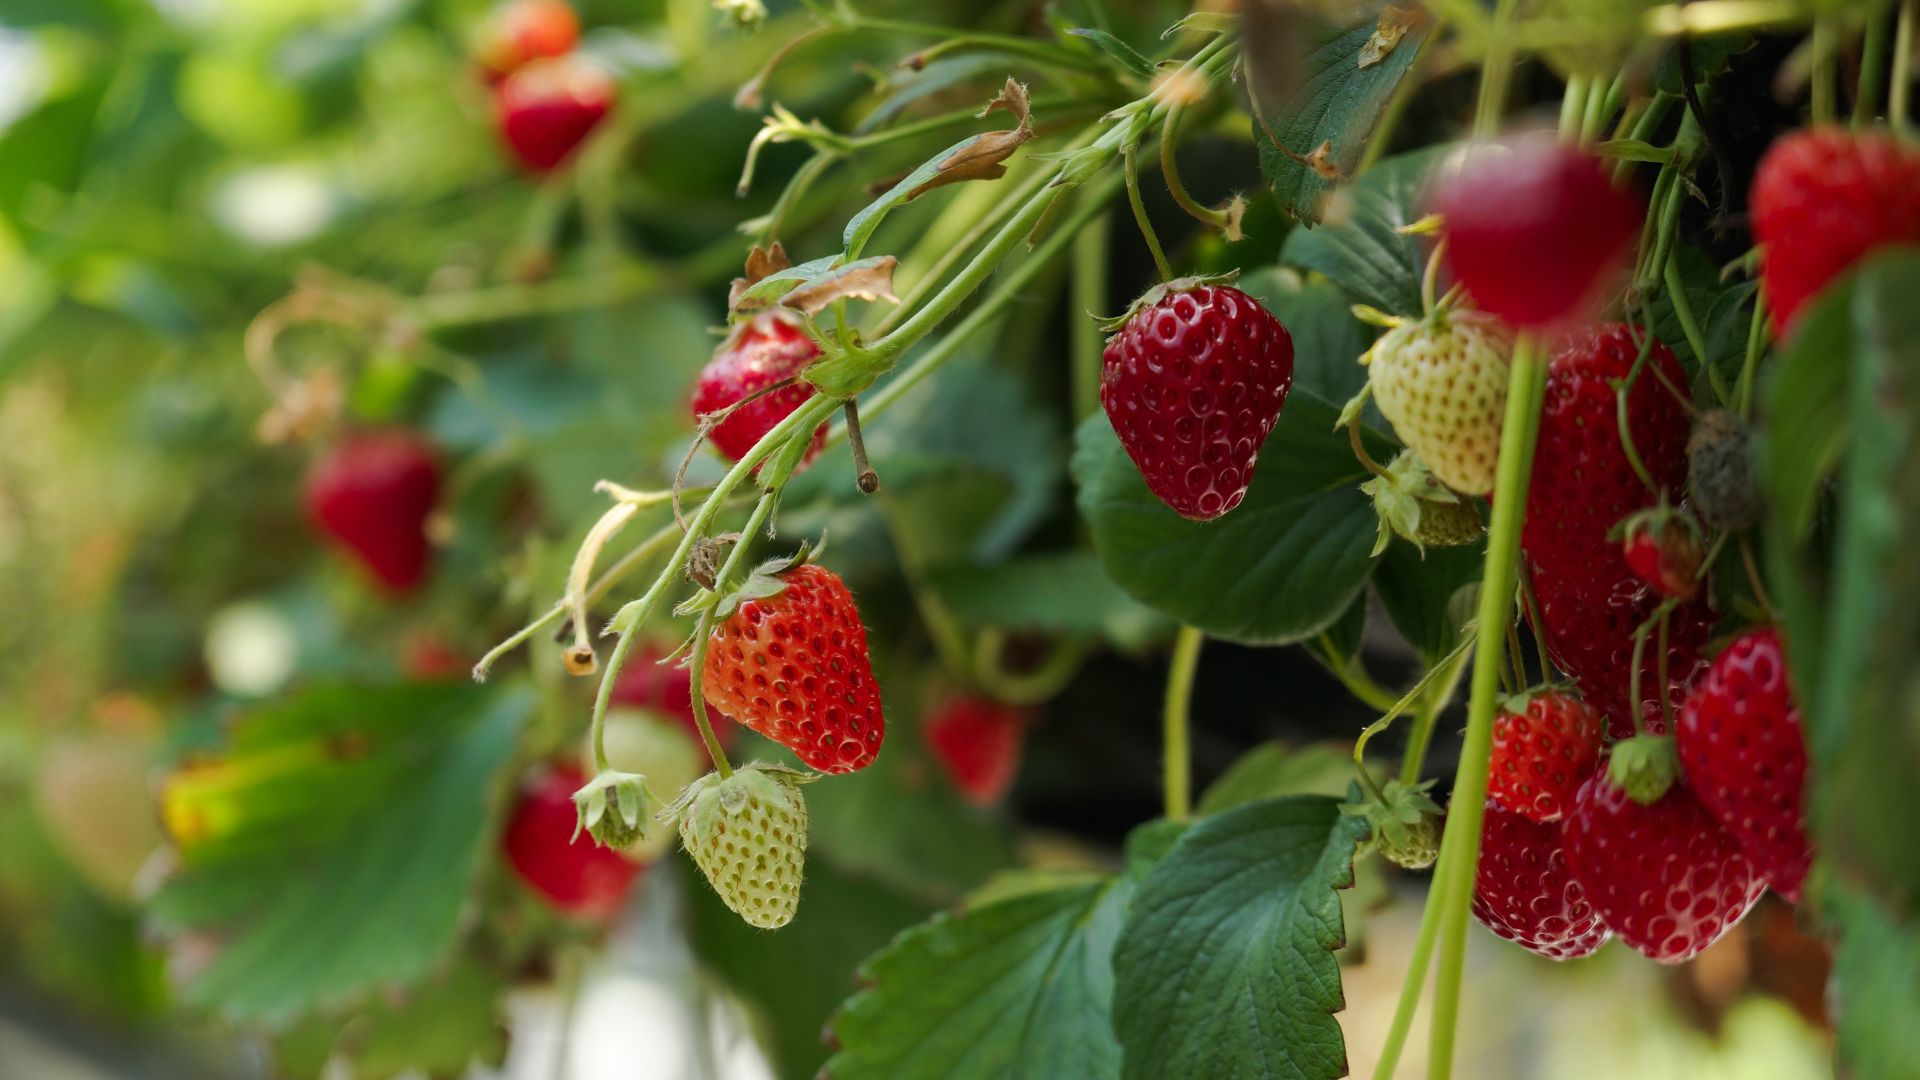 6 Steps For Growing Strawberries From Strawberries